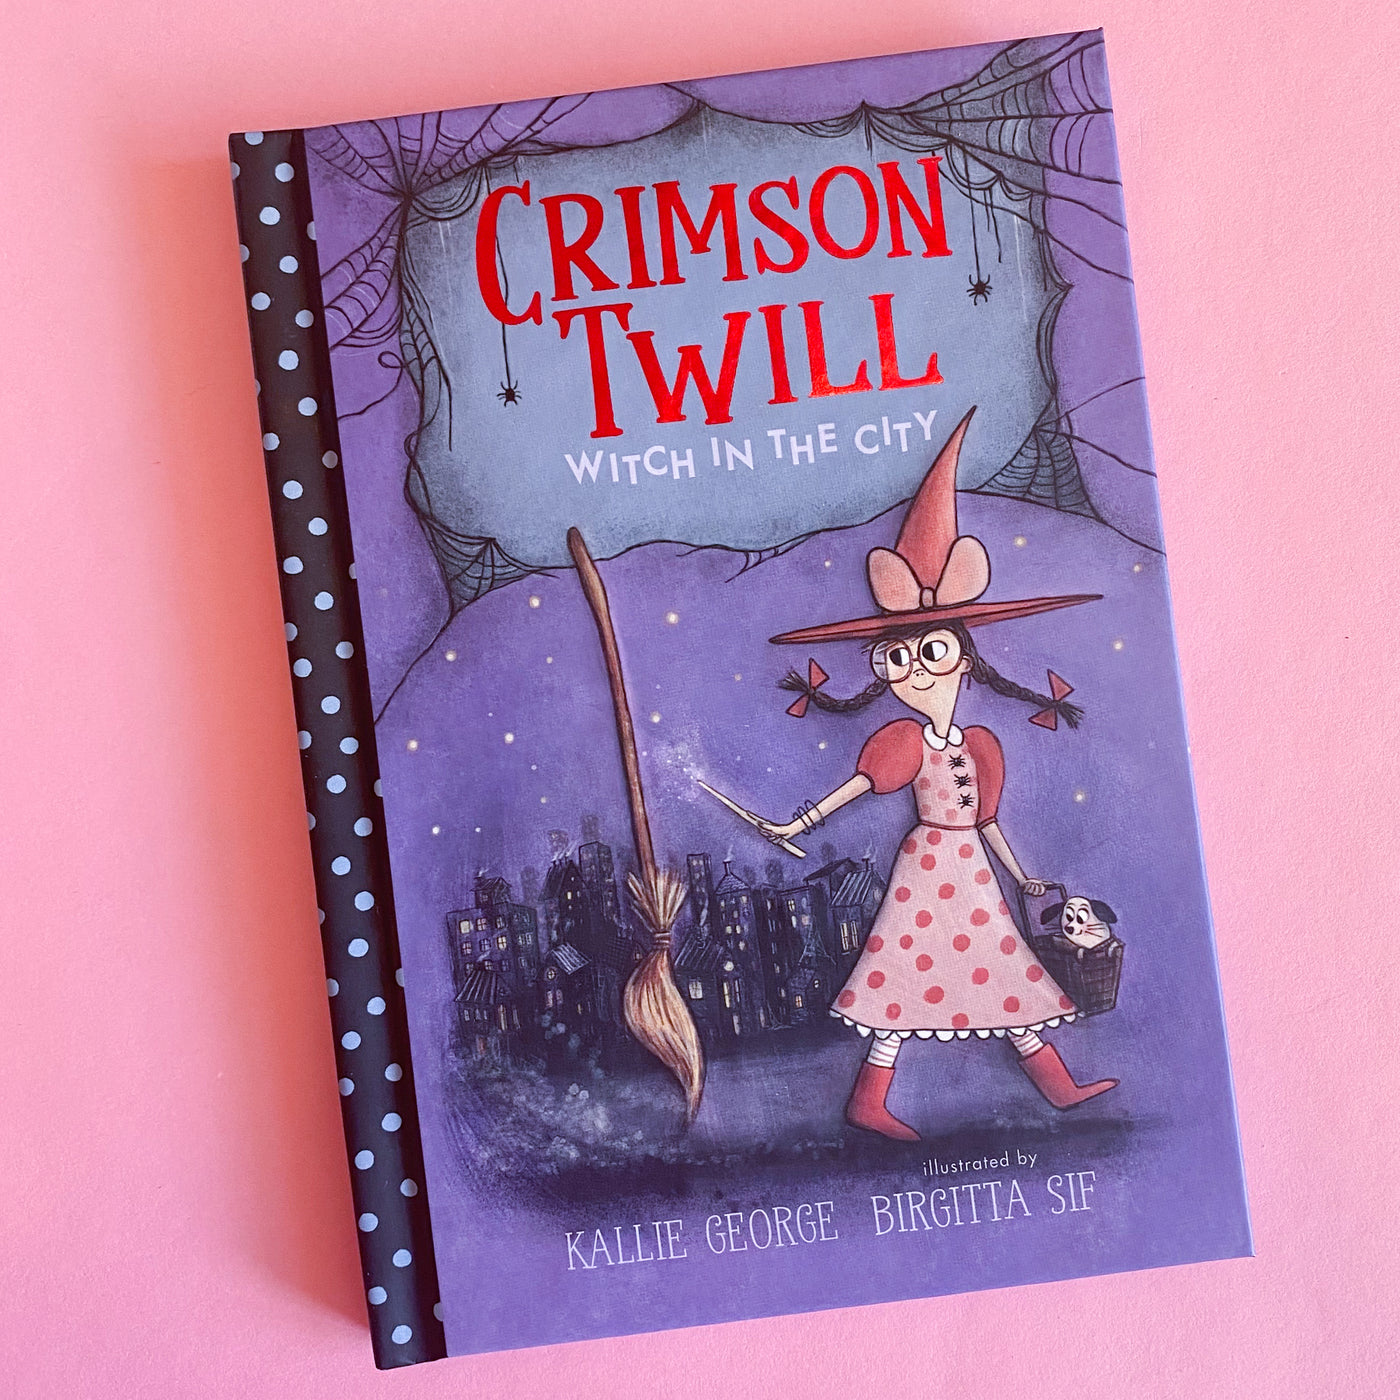 Crimson Twill: Witch in the City by Kallie George and Birgitta Sif